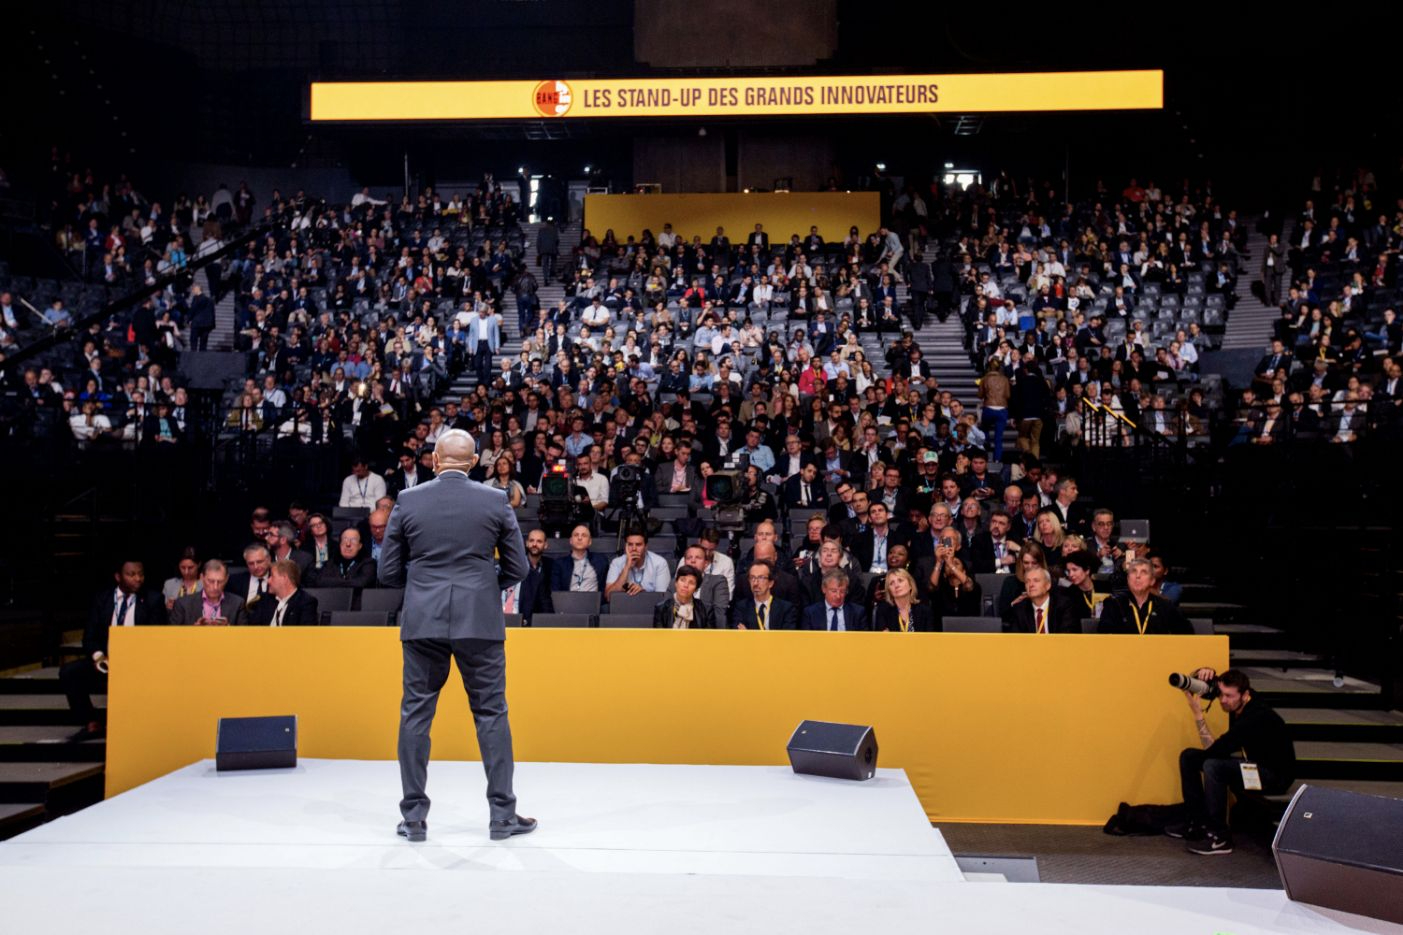 Tony Elumelu Foundation (TEF) launched the documentary “Tony Elumelu Entrepreneurs: Transforming Africa” at a film festival in Paris, chronicling the first year of its ground-breaking Entrepreneurship Programme.